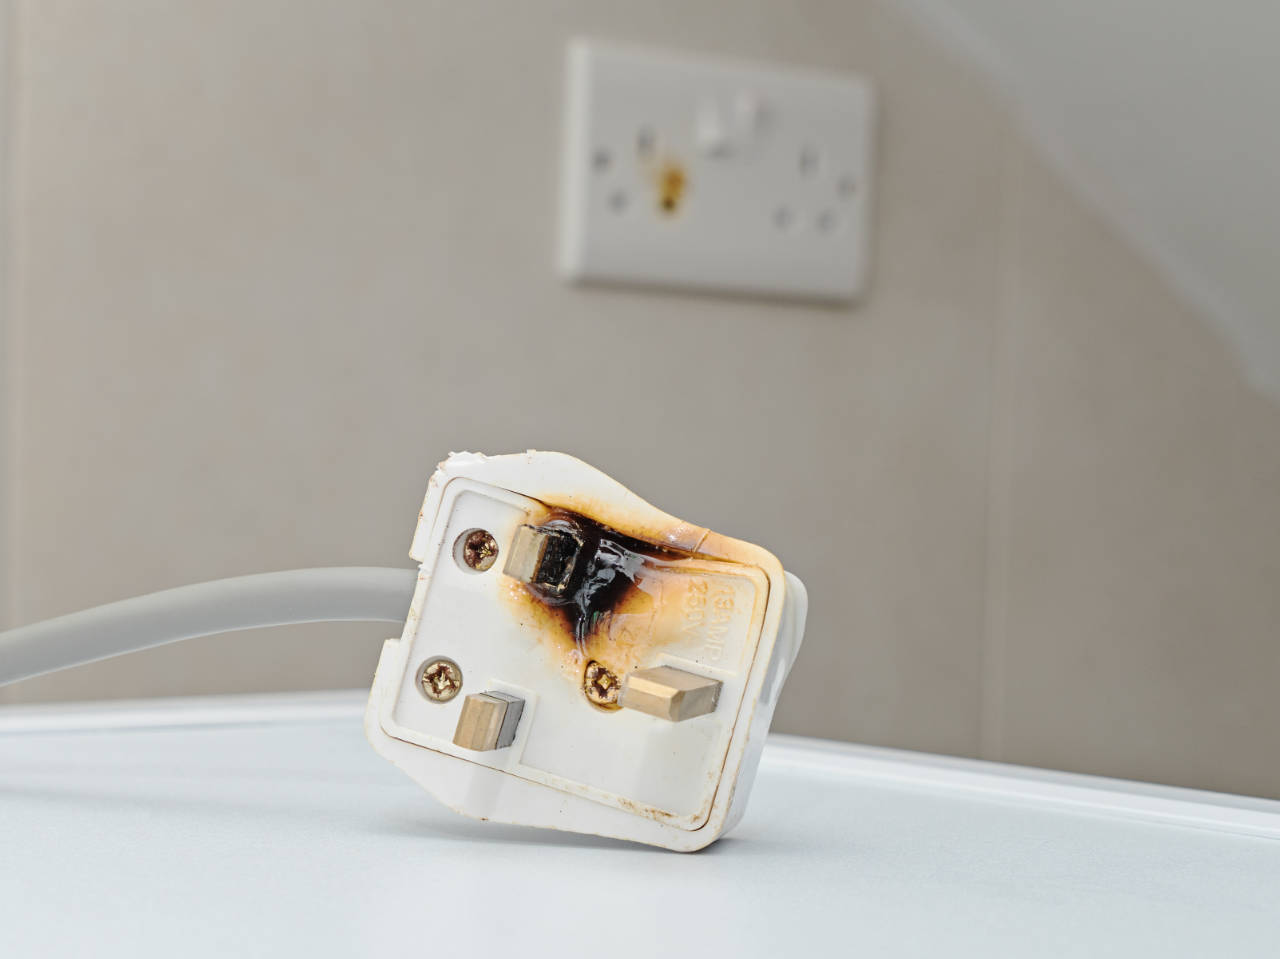 8 Signs You May Have a Problem with Your Electrical Wiring